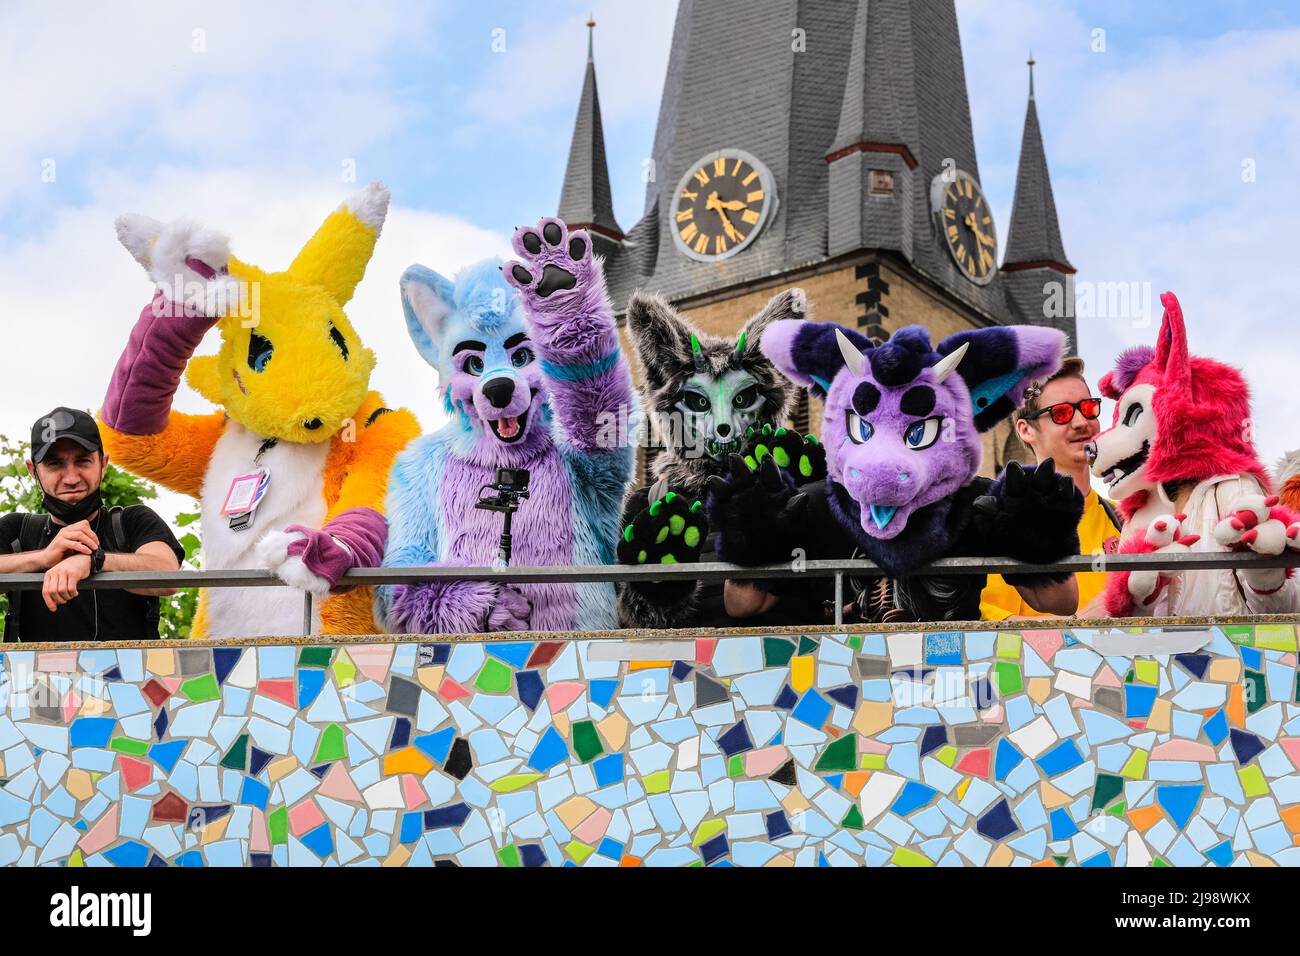 Düsseldorf, NRW, Germany. 21st May, 2022. A group of cosplayers have fun despite their warm, furry outfits. Tens of thousands of visitors and cosplayers enjoy the warm sunshine along the river Rhine embankment in their outfits inspired by Japanese anime, video and games. Stage performances, cosplay, stalls and demonstrations of Japanese culture, sports and traditions are featured at Düsseldorf's annual Japan Day, celebrating Japan and the Japanese community in the city. Düsseldorf is home to the largest Japanese community in Germany. Credit: Imageplotter/Alamy Live News Stock Photo